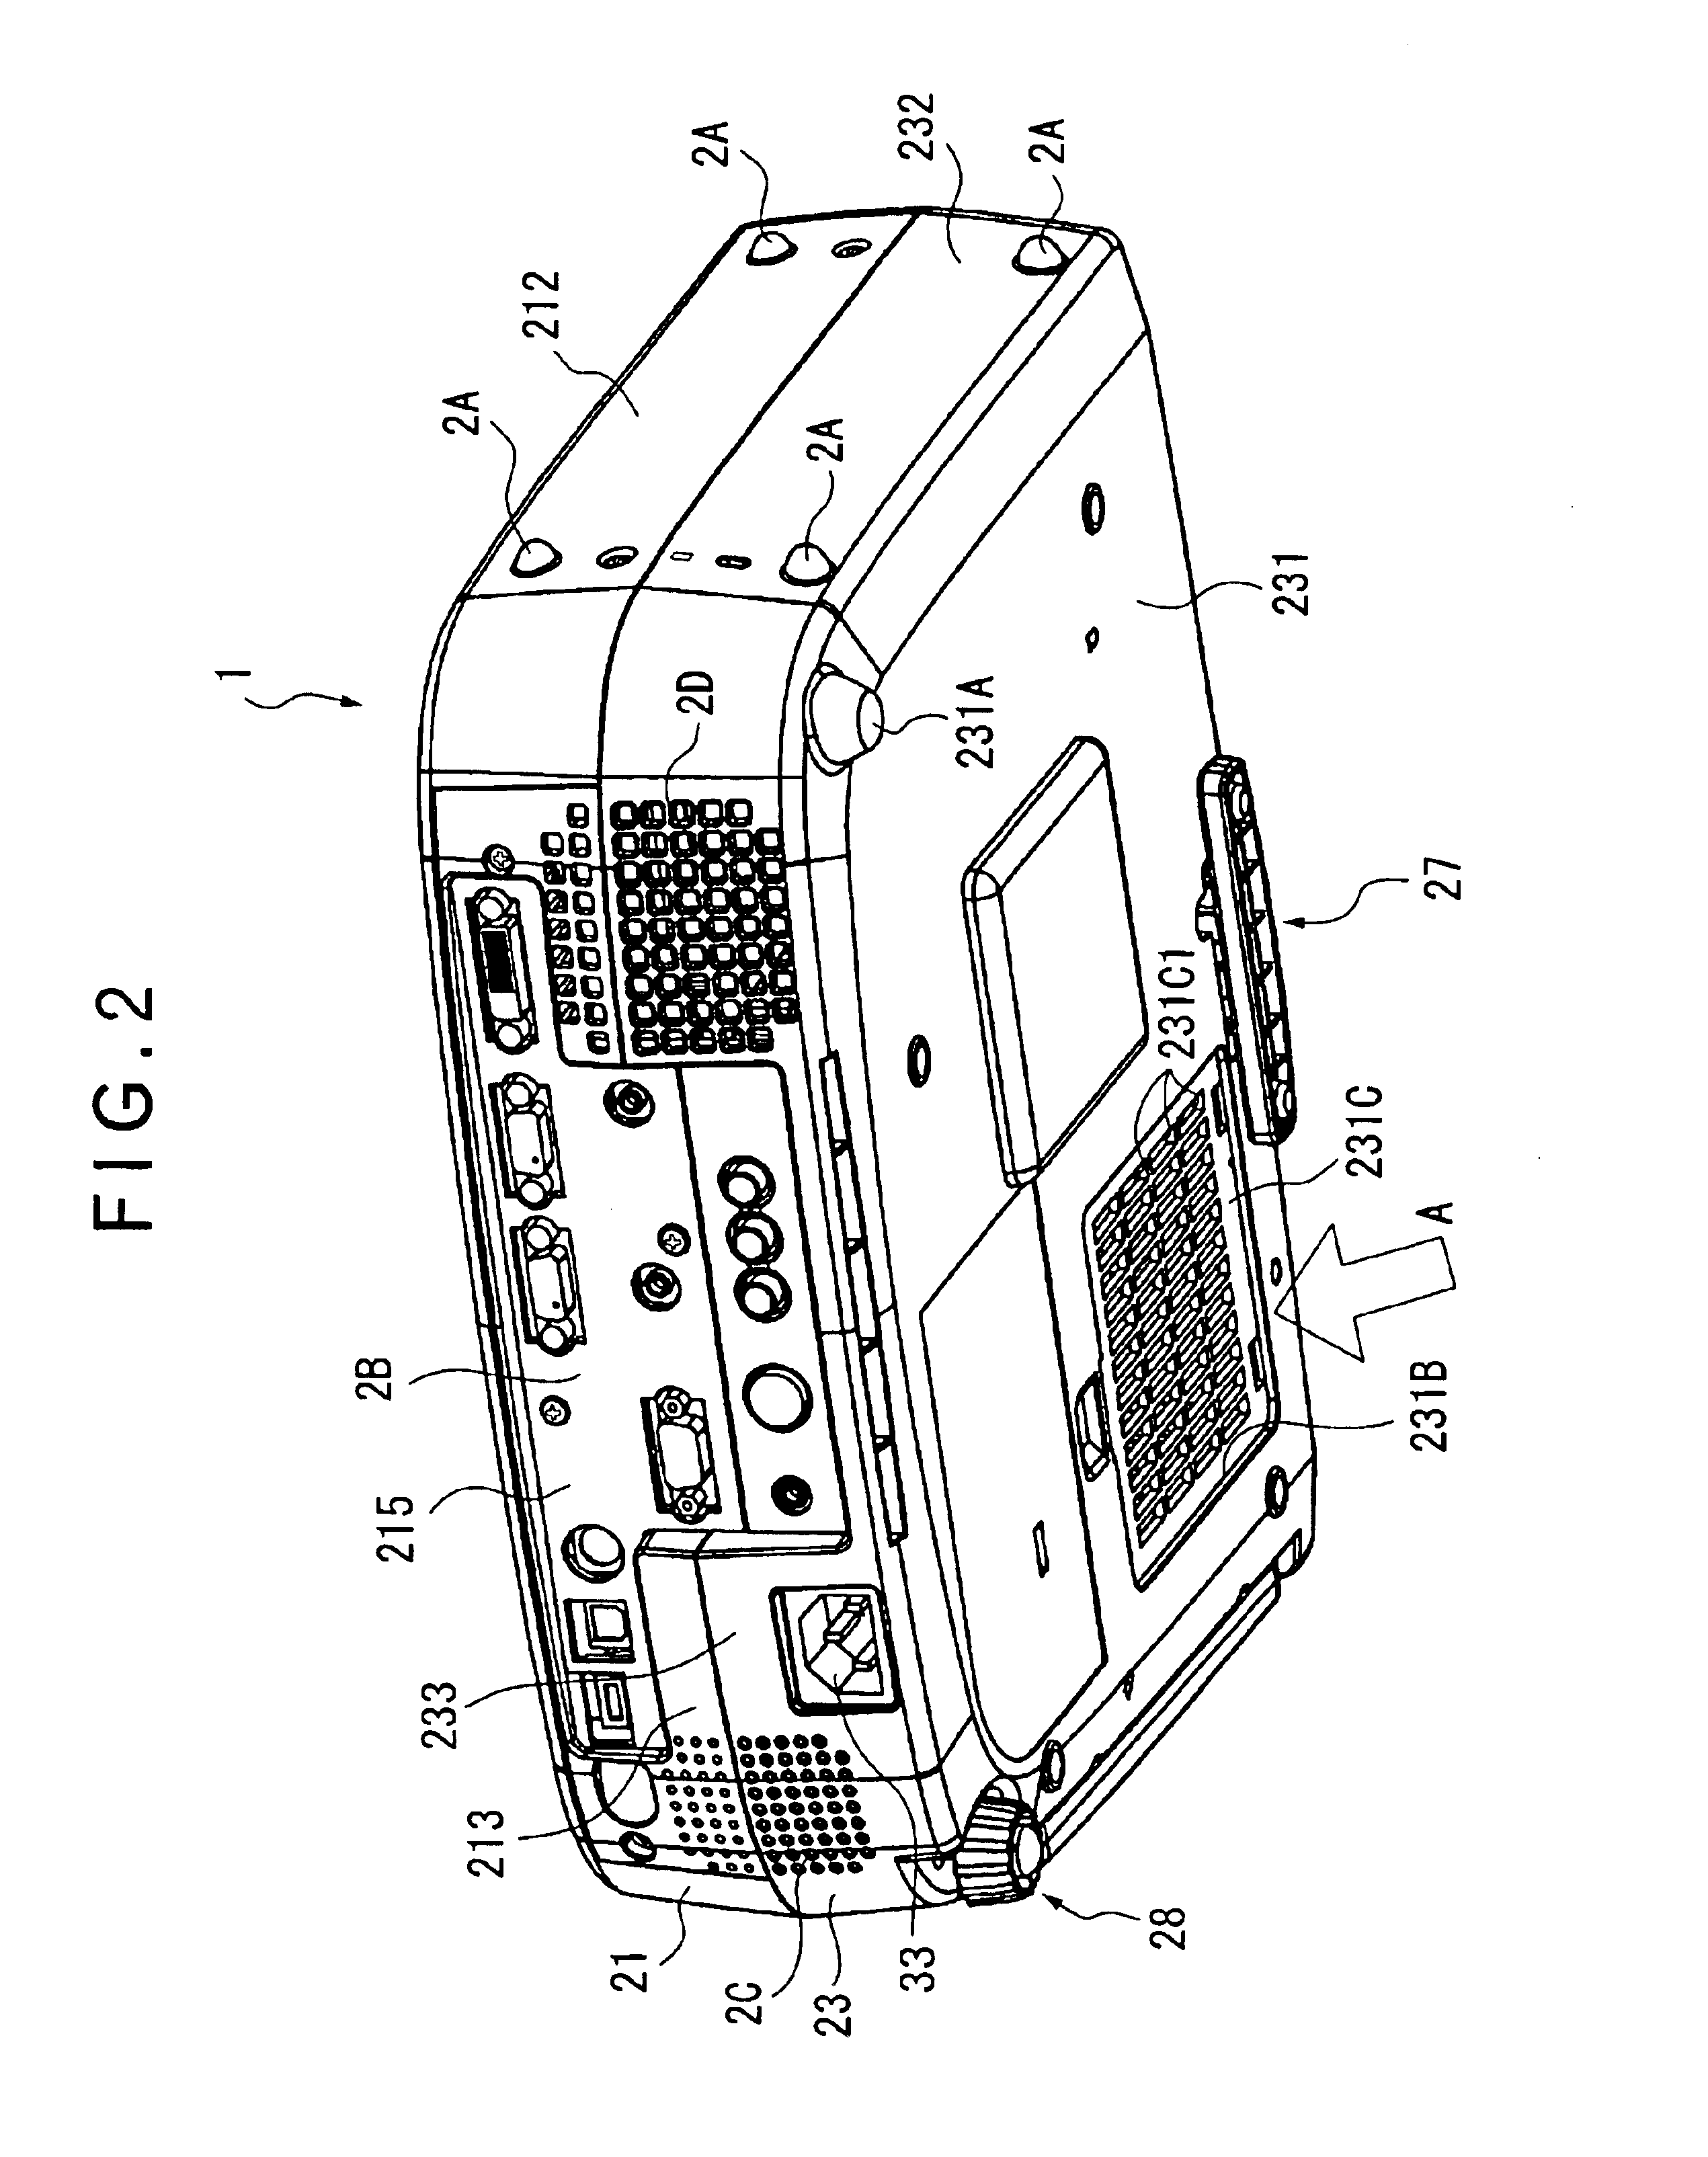 Cooler for electro optic device and projector